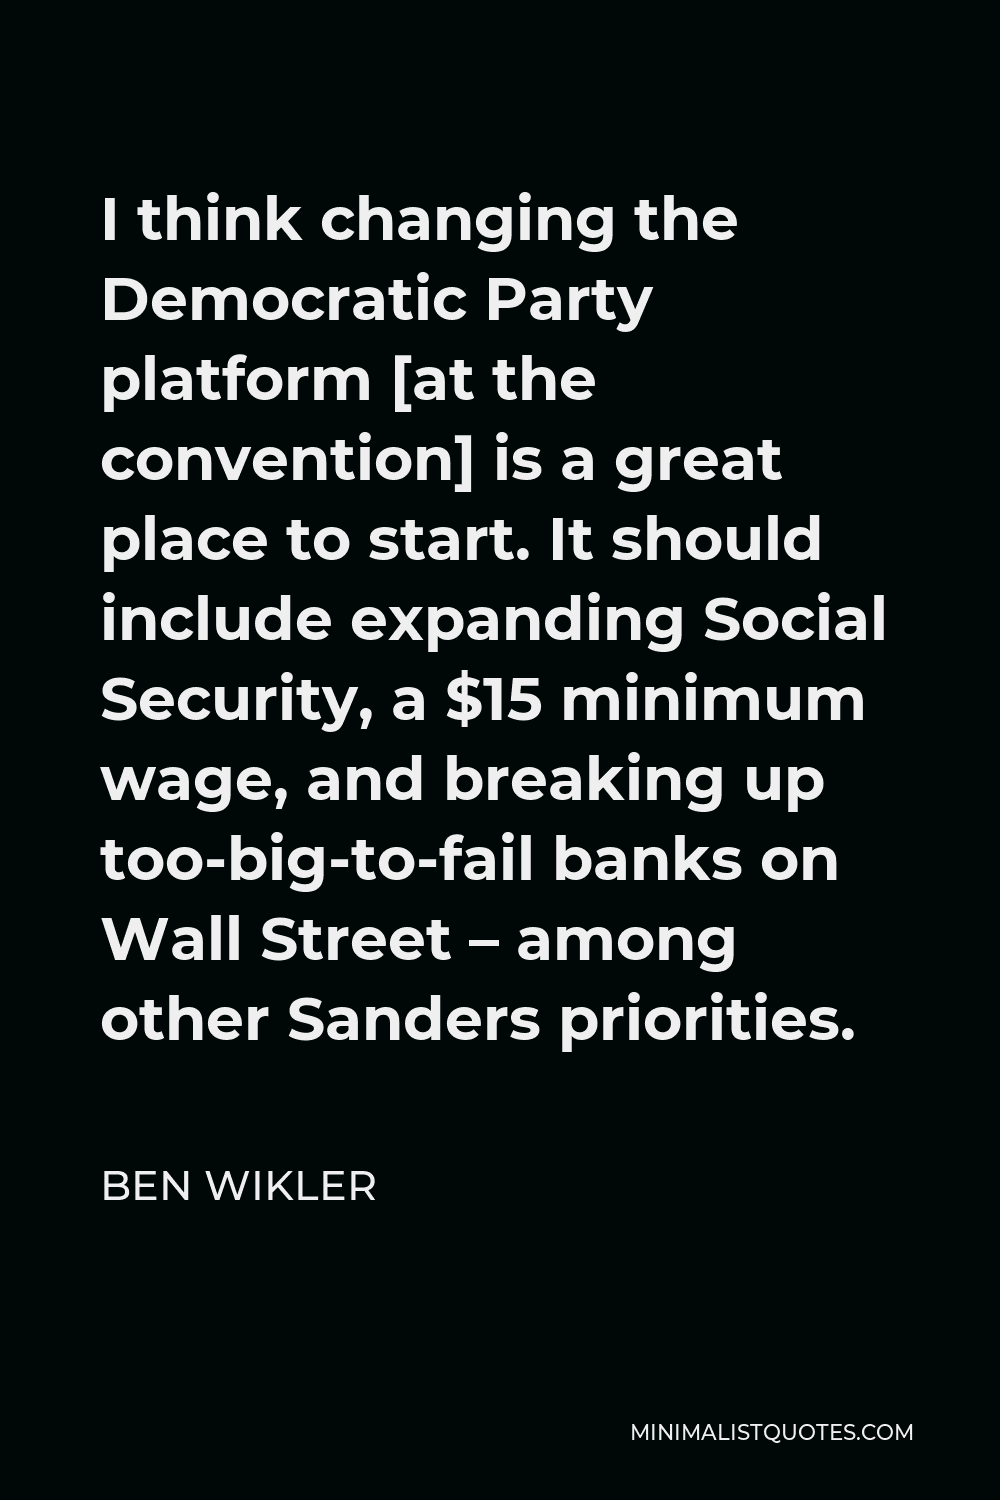 Ben Wikler Quote - I think changing the Democratic Party platform [at the convention] is a great place to start. It should include expanding Social Security, a $15 minimum wage, and breaking up too-big-to-fail banks on Wall Street – among other Sanders priorities.